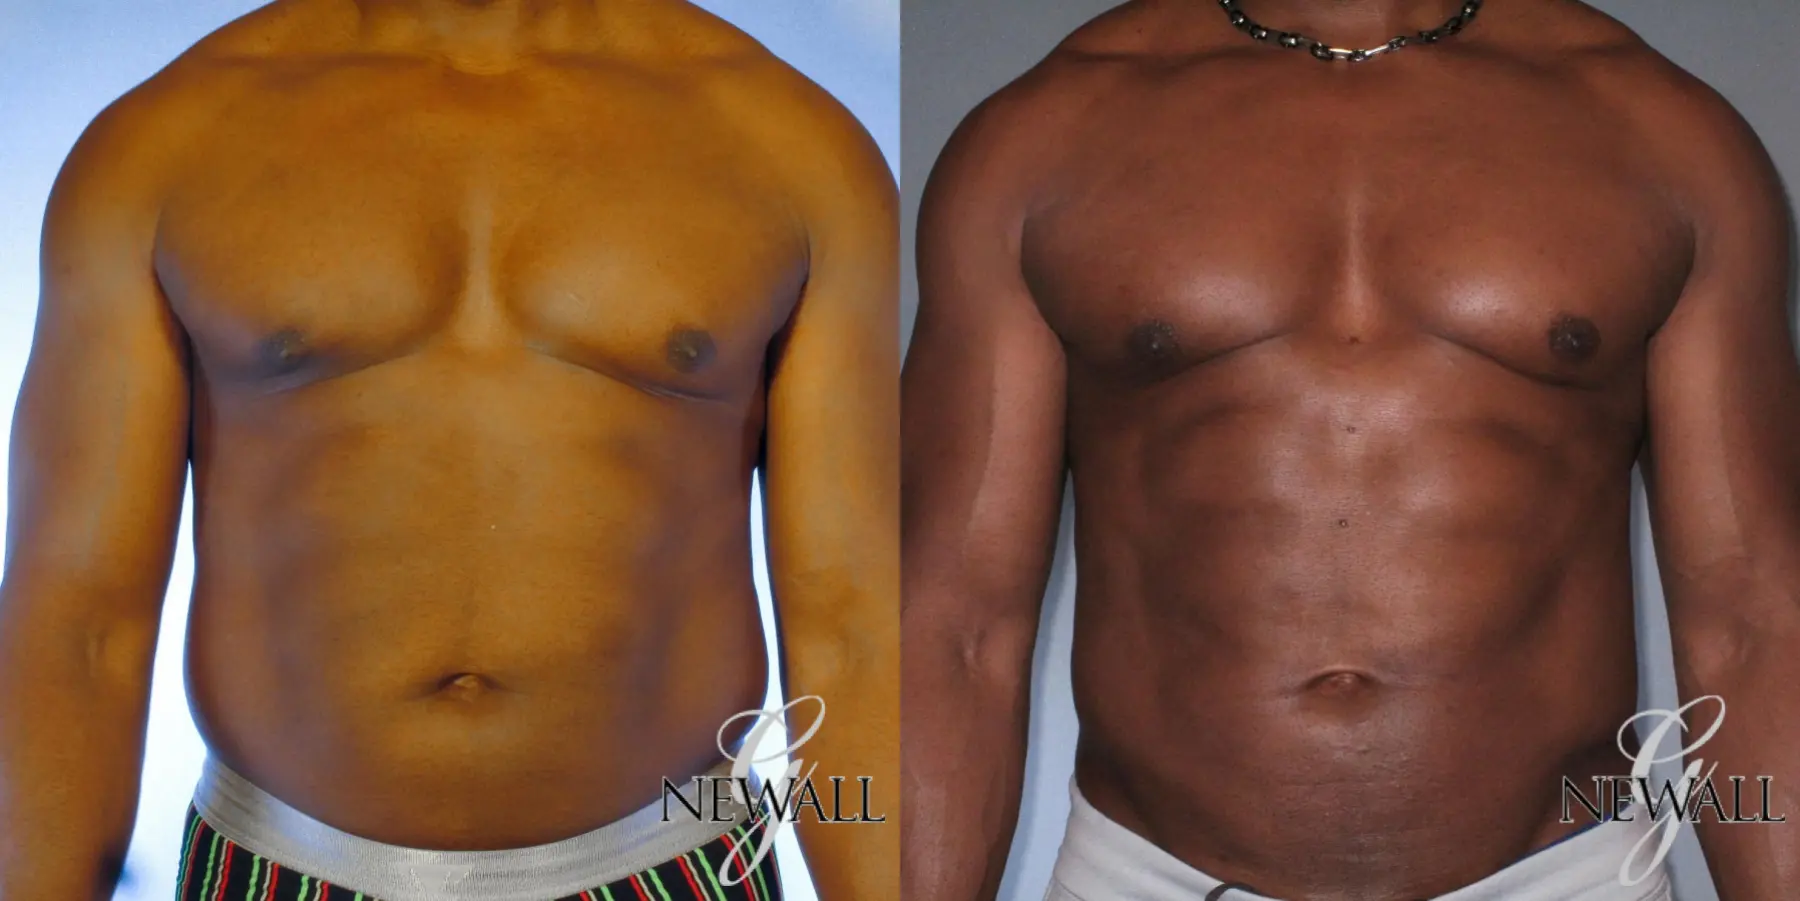 Abdominal-etching-for-men: Patient 1 - Before and After  